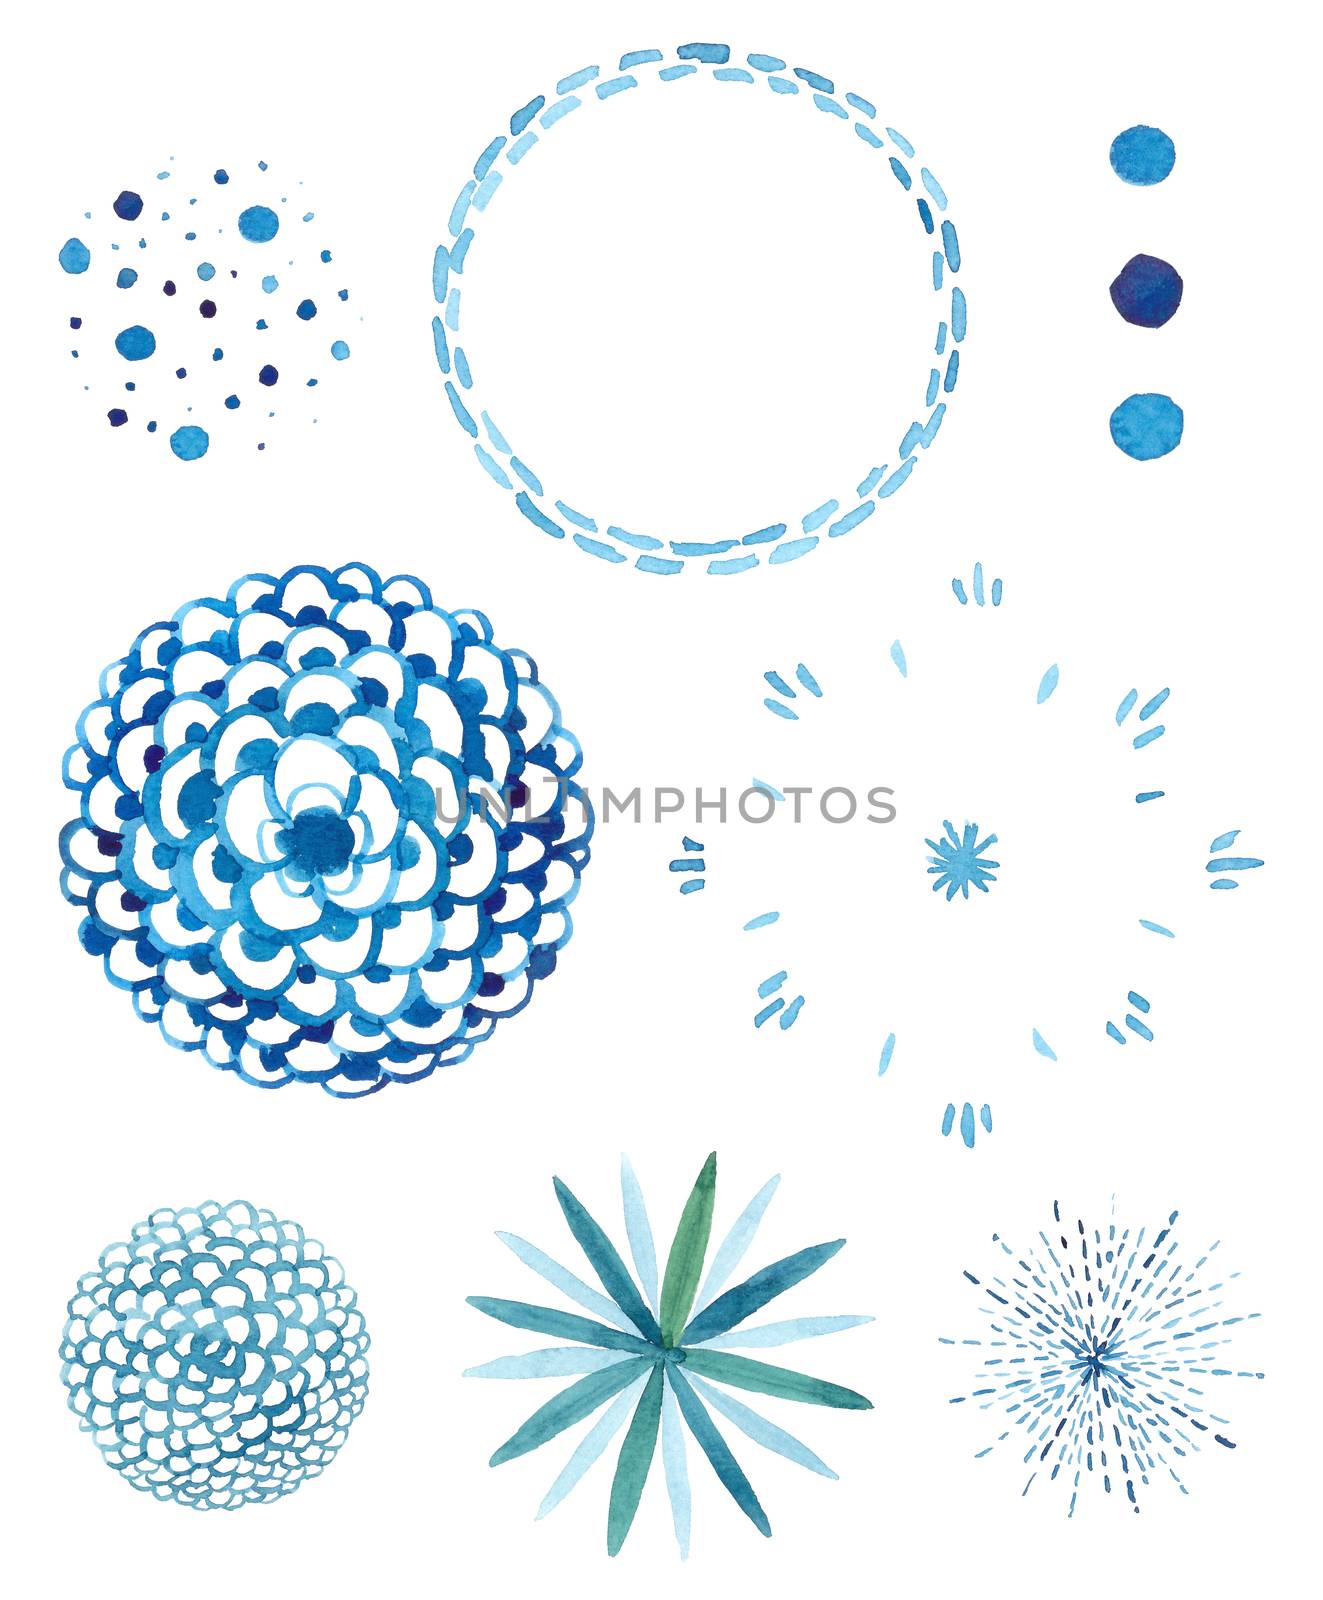 Creative illustration of geometric hand drawn sun beams and flowers isolated on background. Art design linear sunlight waves, shining lines ray stars. Abstract concept graphic round or circle form element.